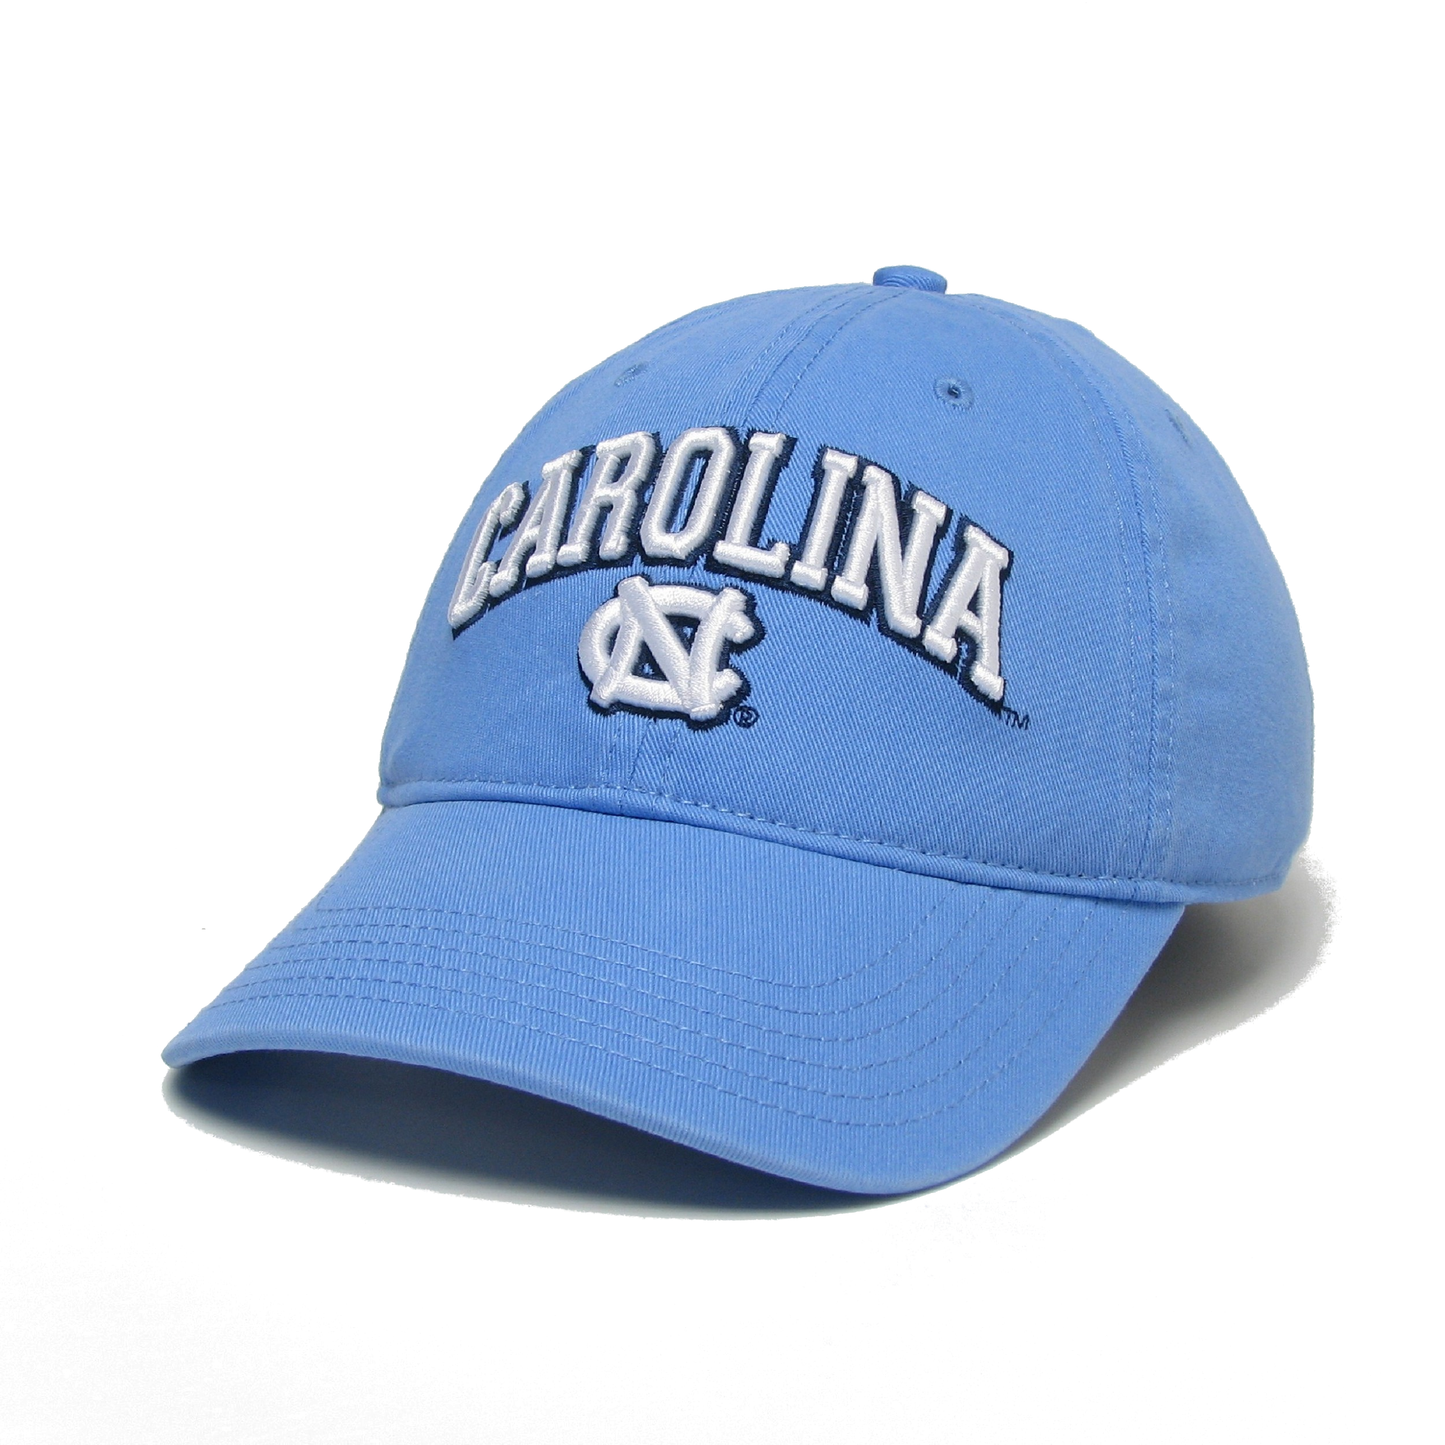 UNC Hat in Carolina Blue with Embroidered Main Event Logo